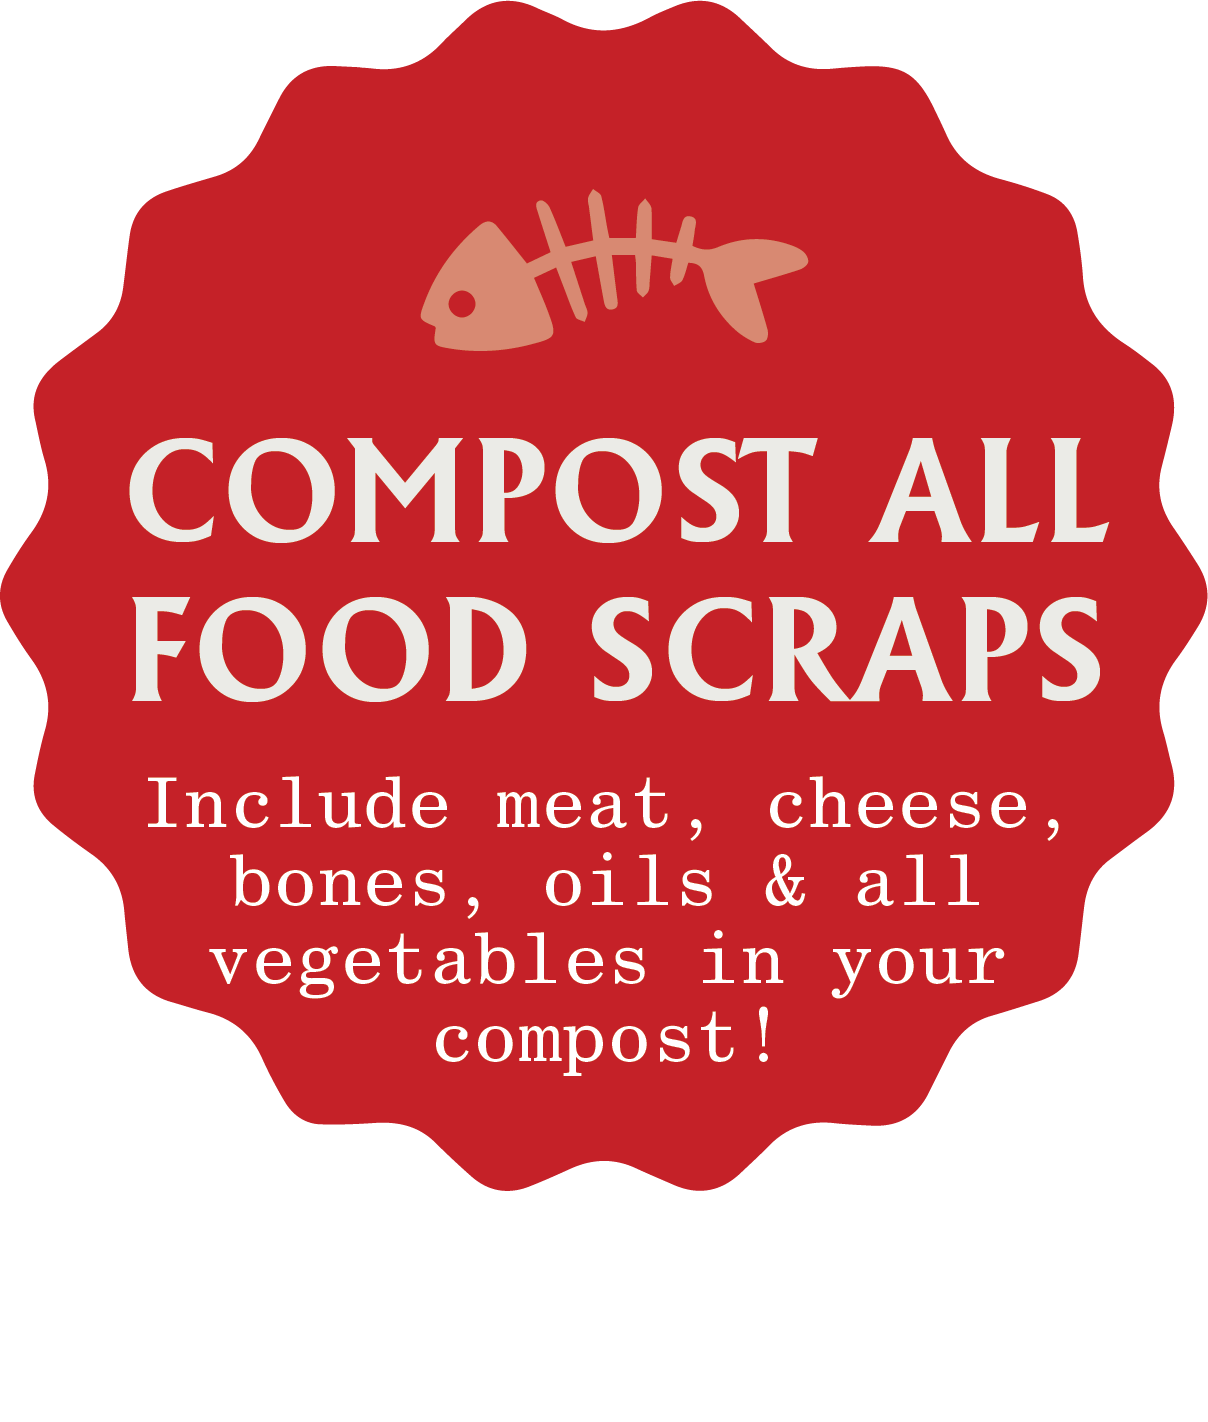 Compost all food scraps with Kenkashi 